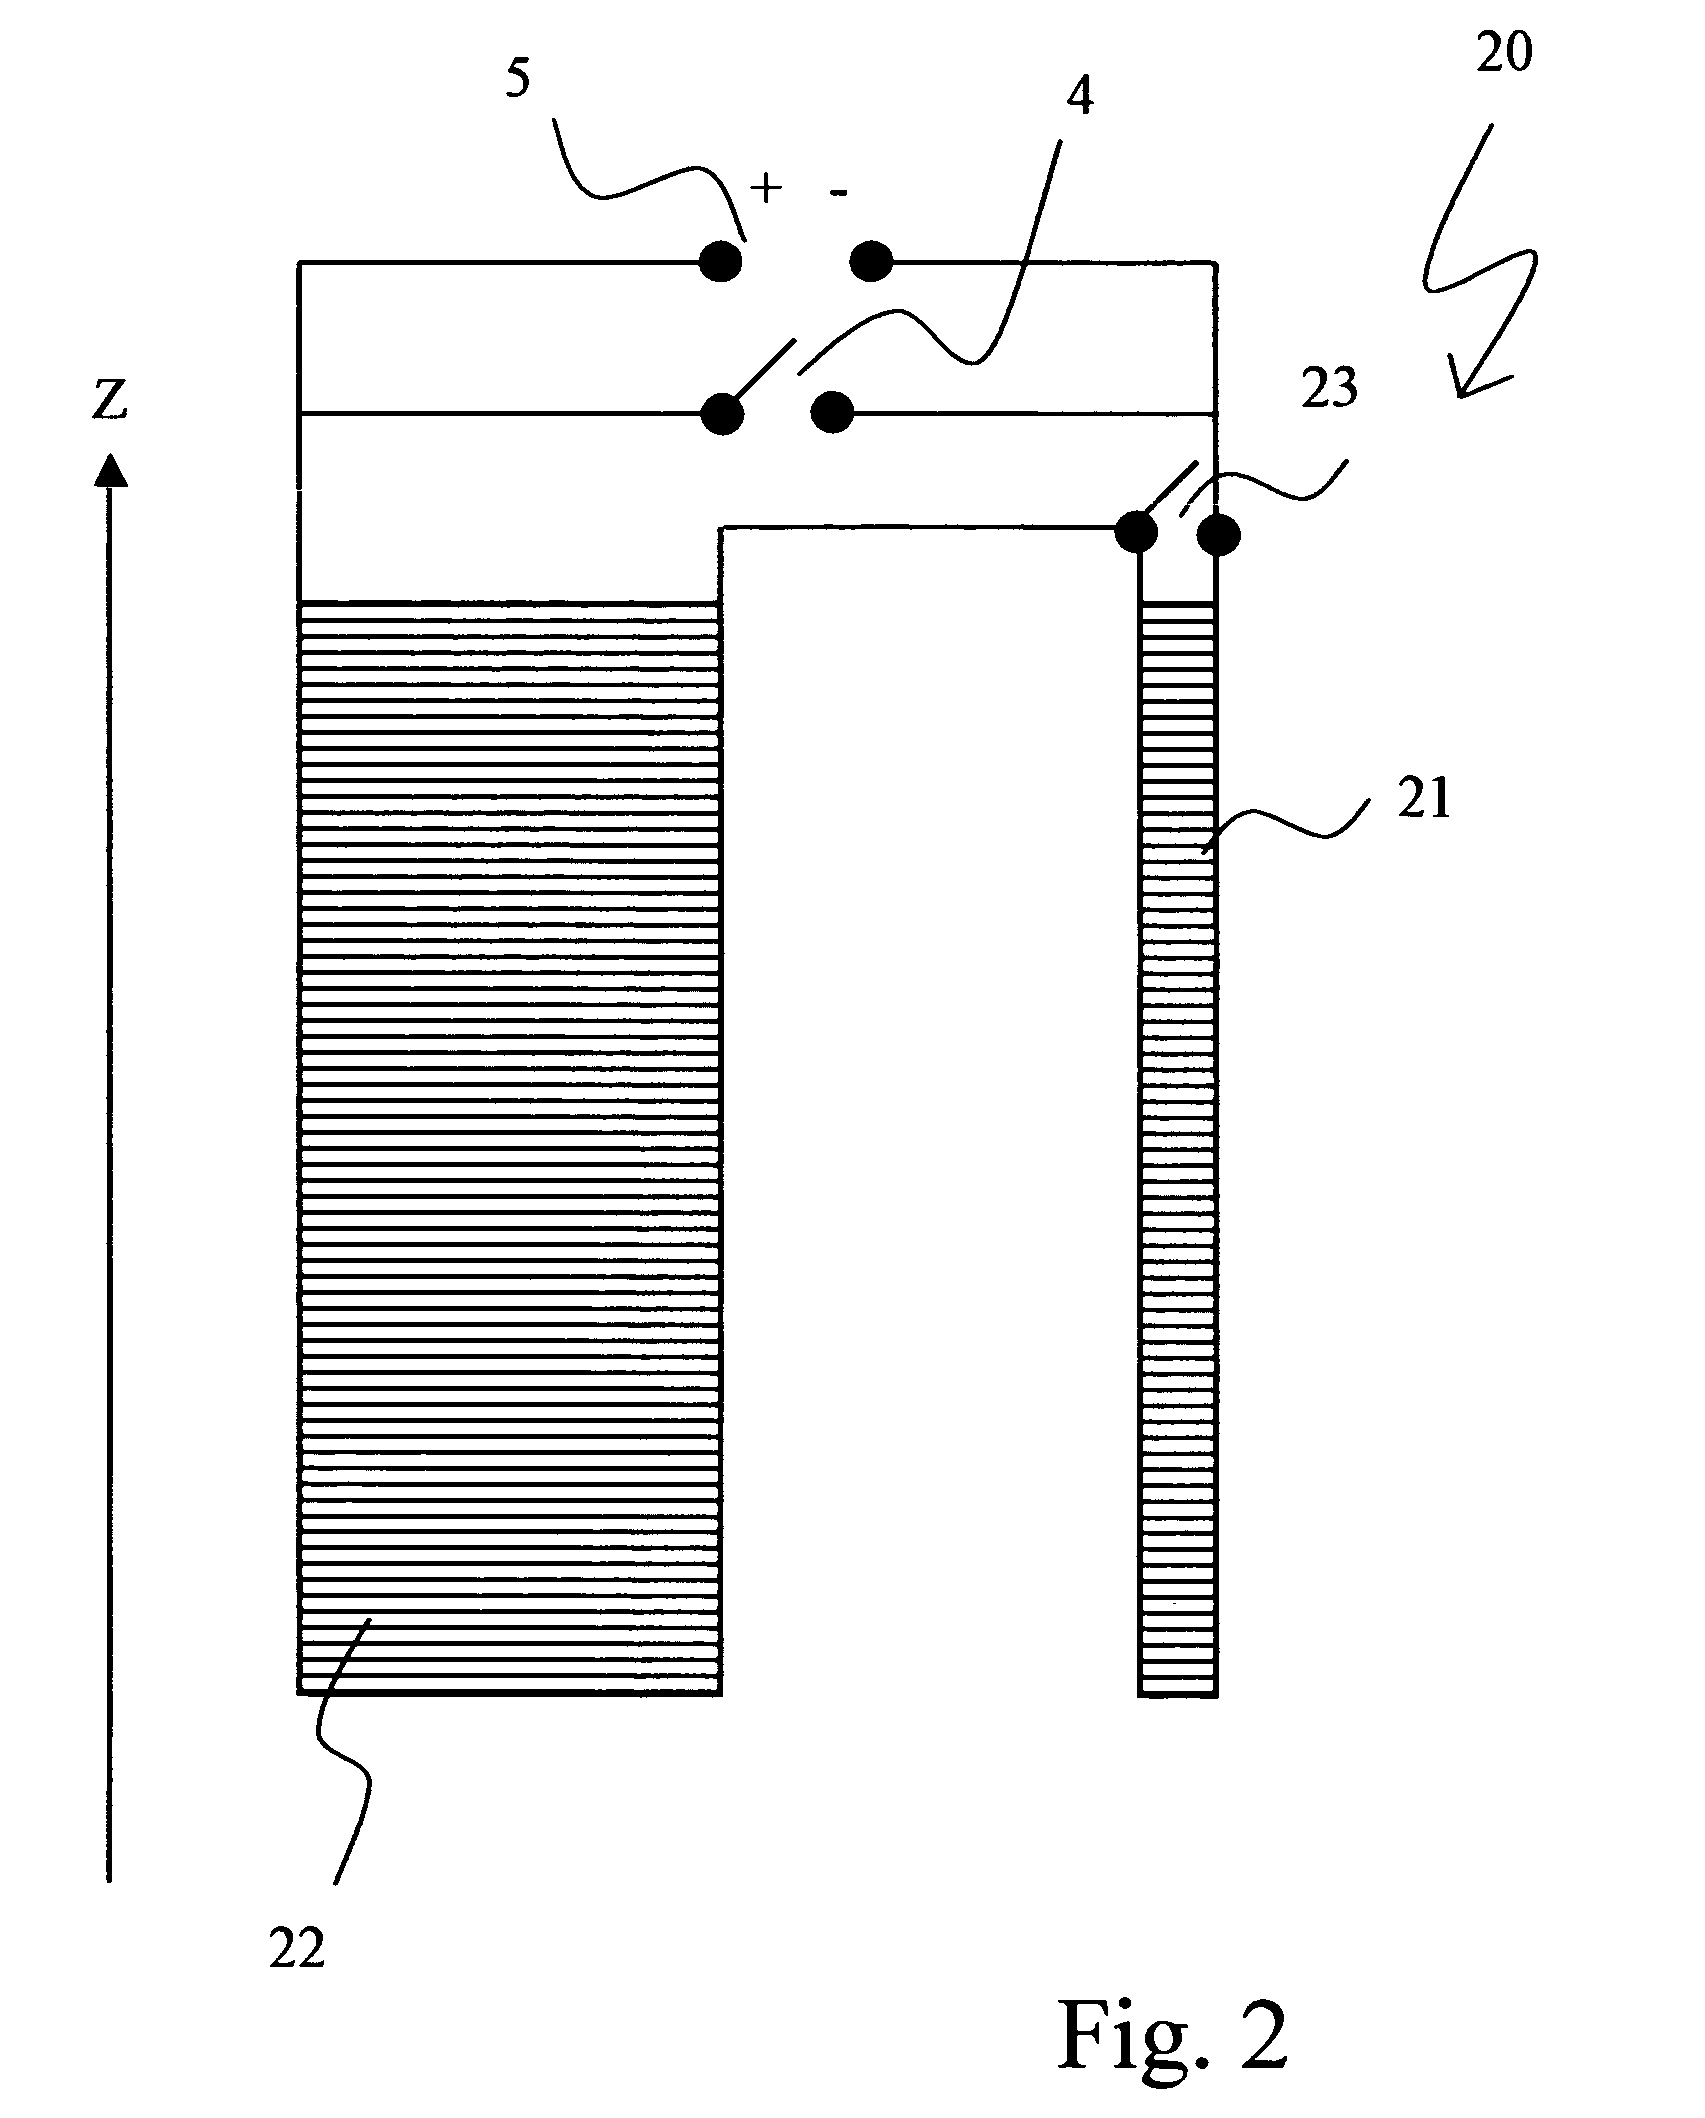 Method for fringe field compensation of an actively shielded superconducting nmr magnet